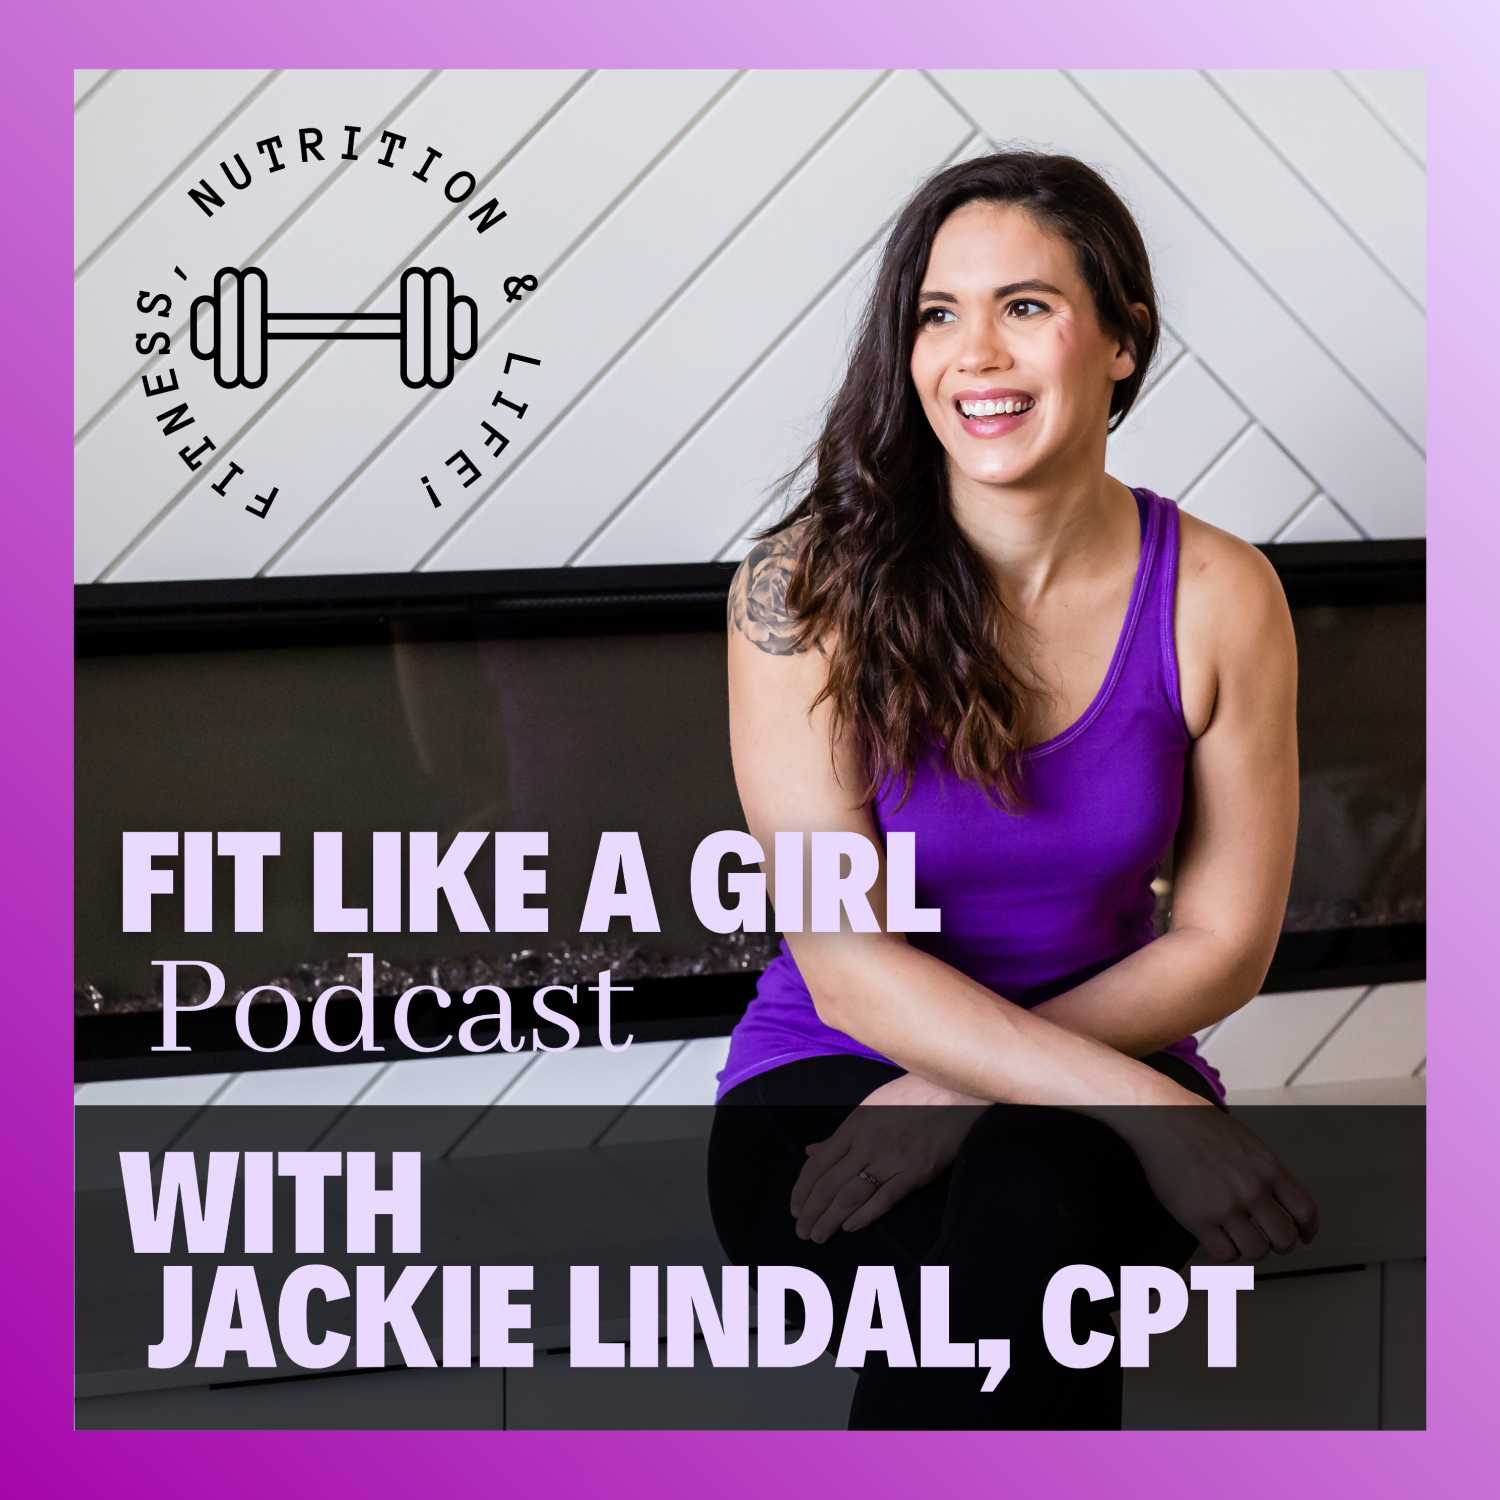 Episode #28: Q&A- Ab workouts for fat loss? Start with Exercise or Diet? Are morning workouts better?